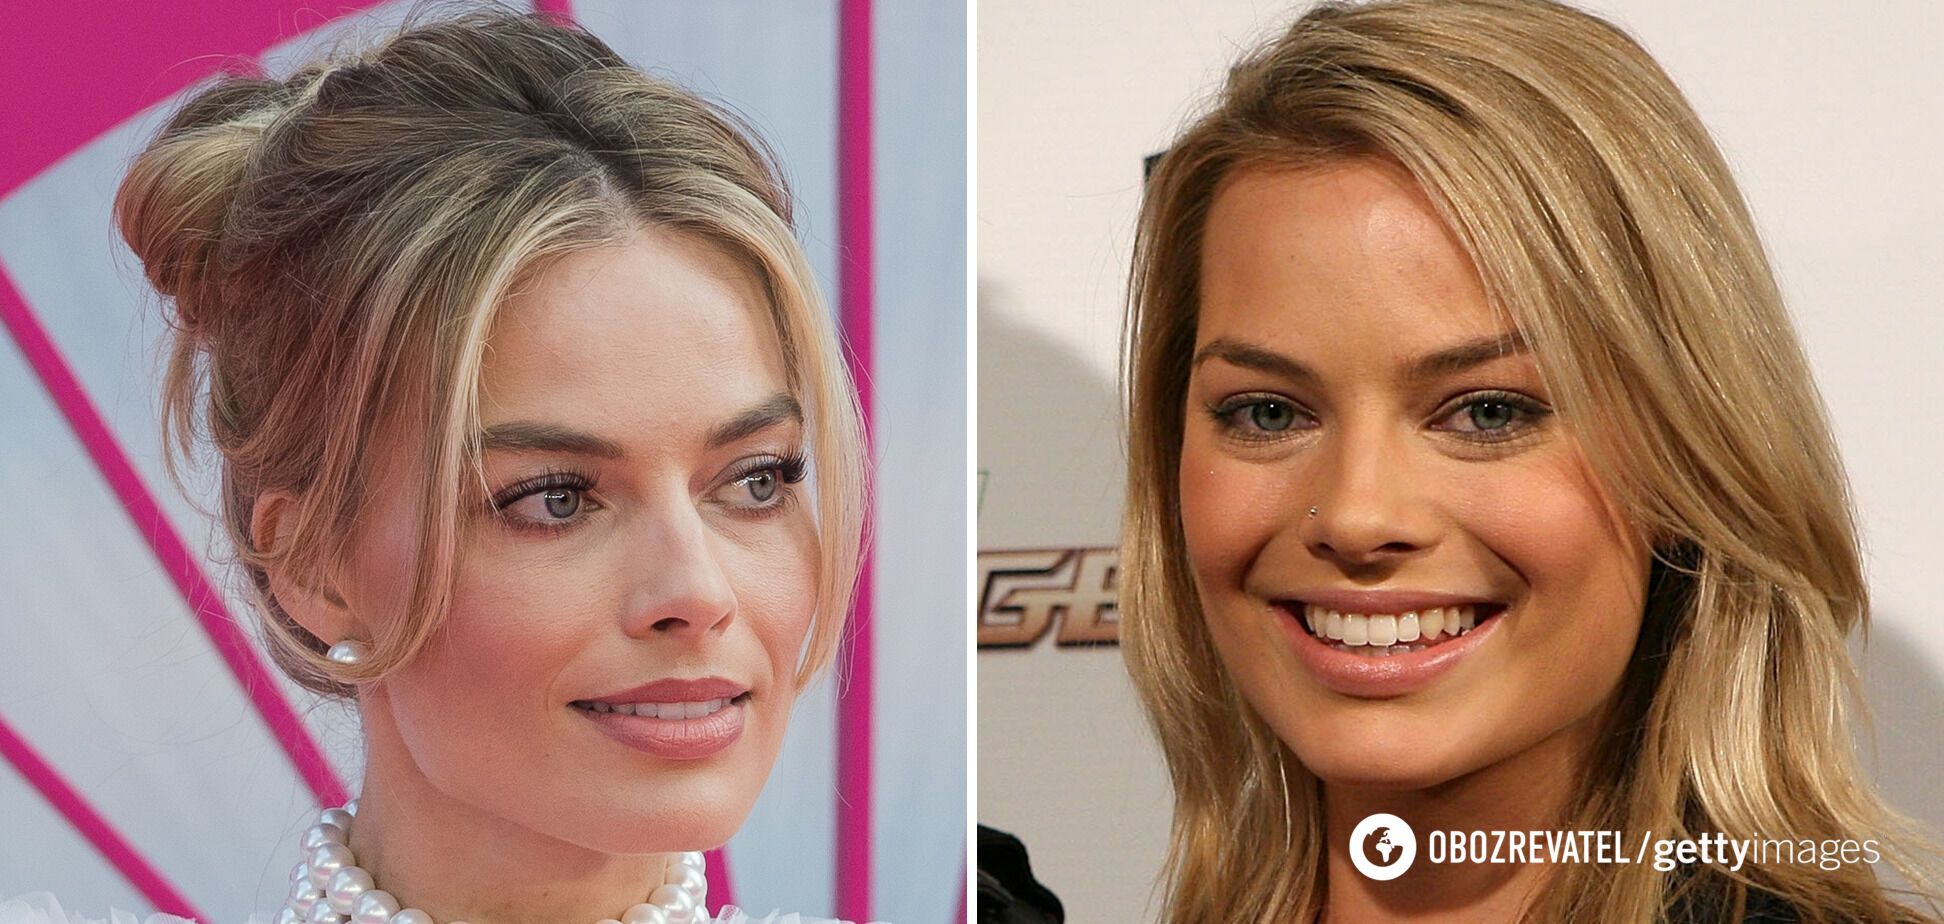 Nose, eyes, chin altered: expert reveals how Margot Robbie 'reshaped' her face before 'Barbie' shoot. Photo comparison